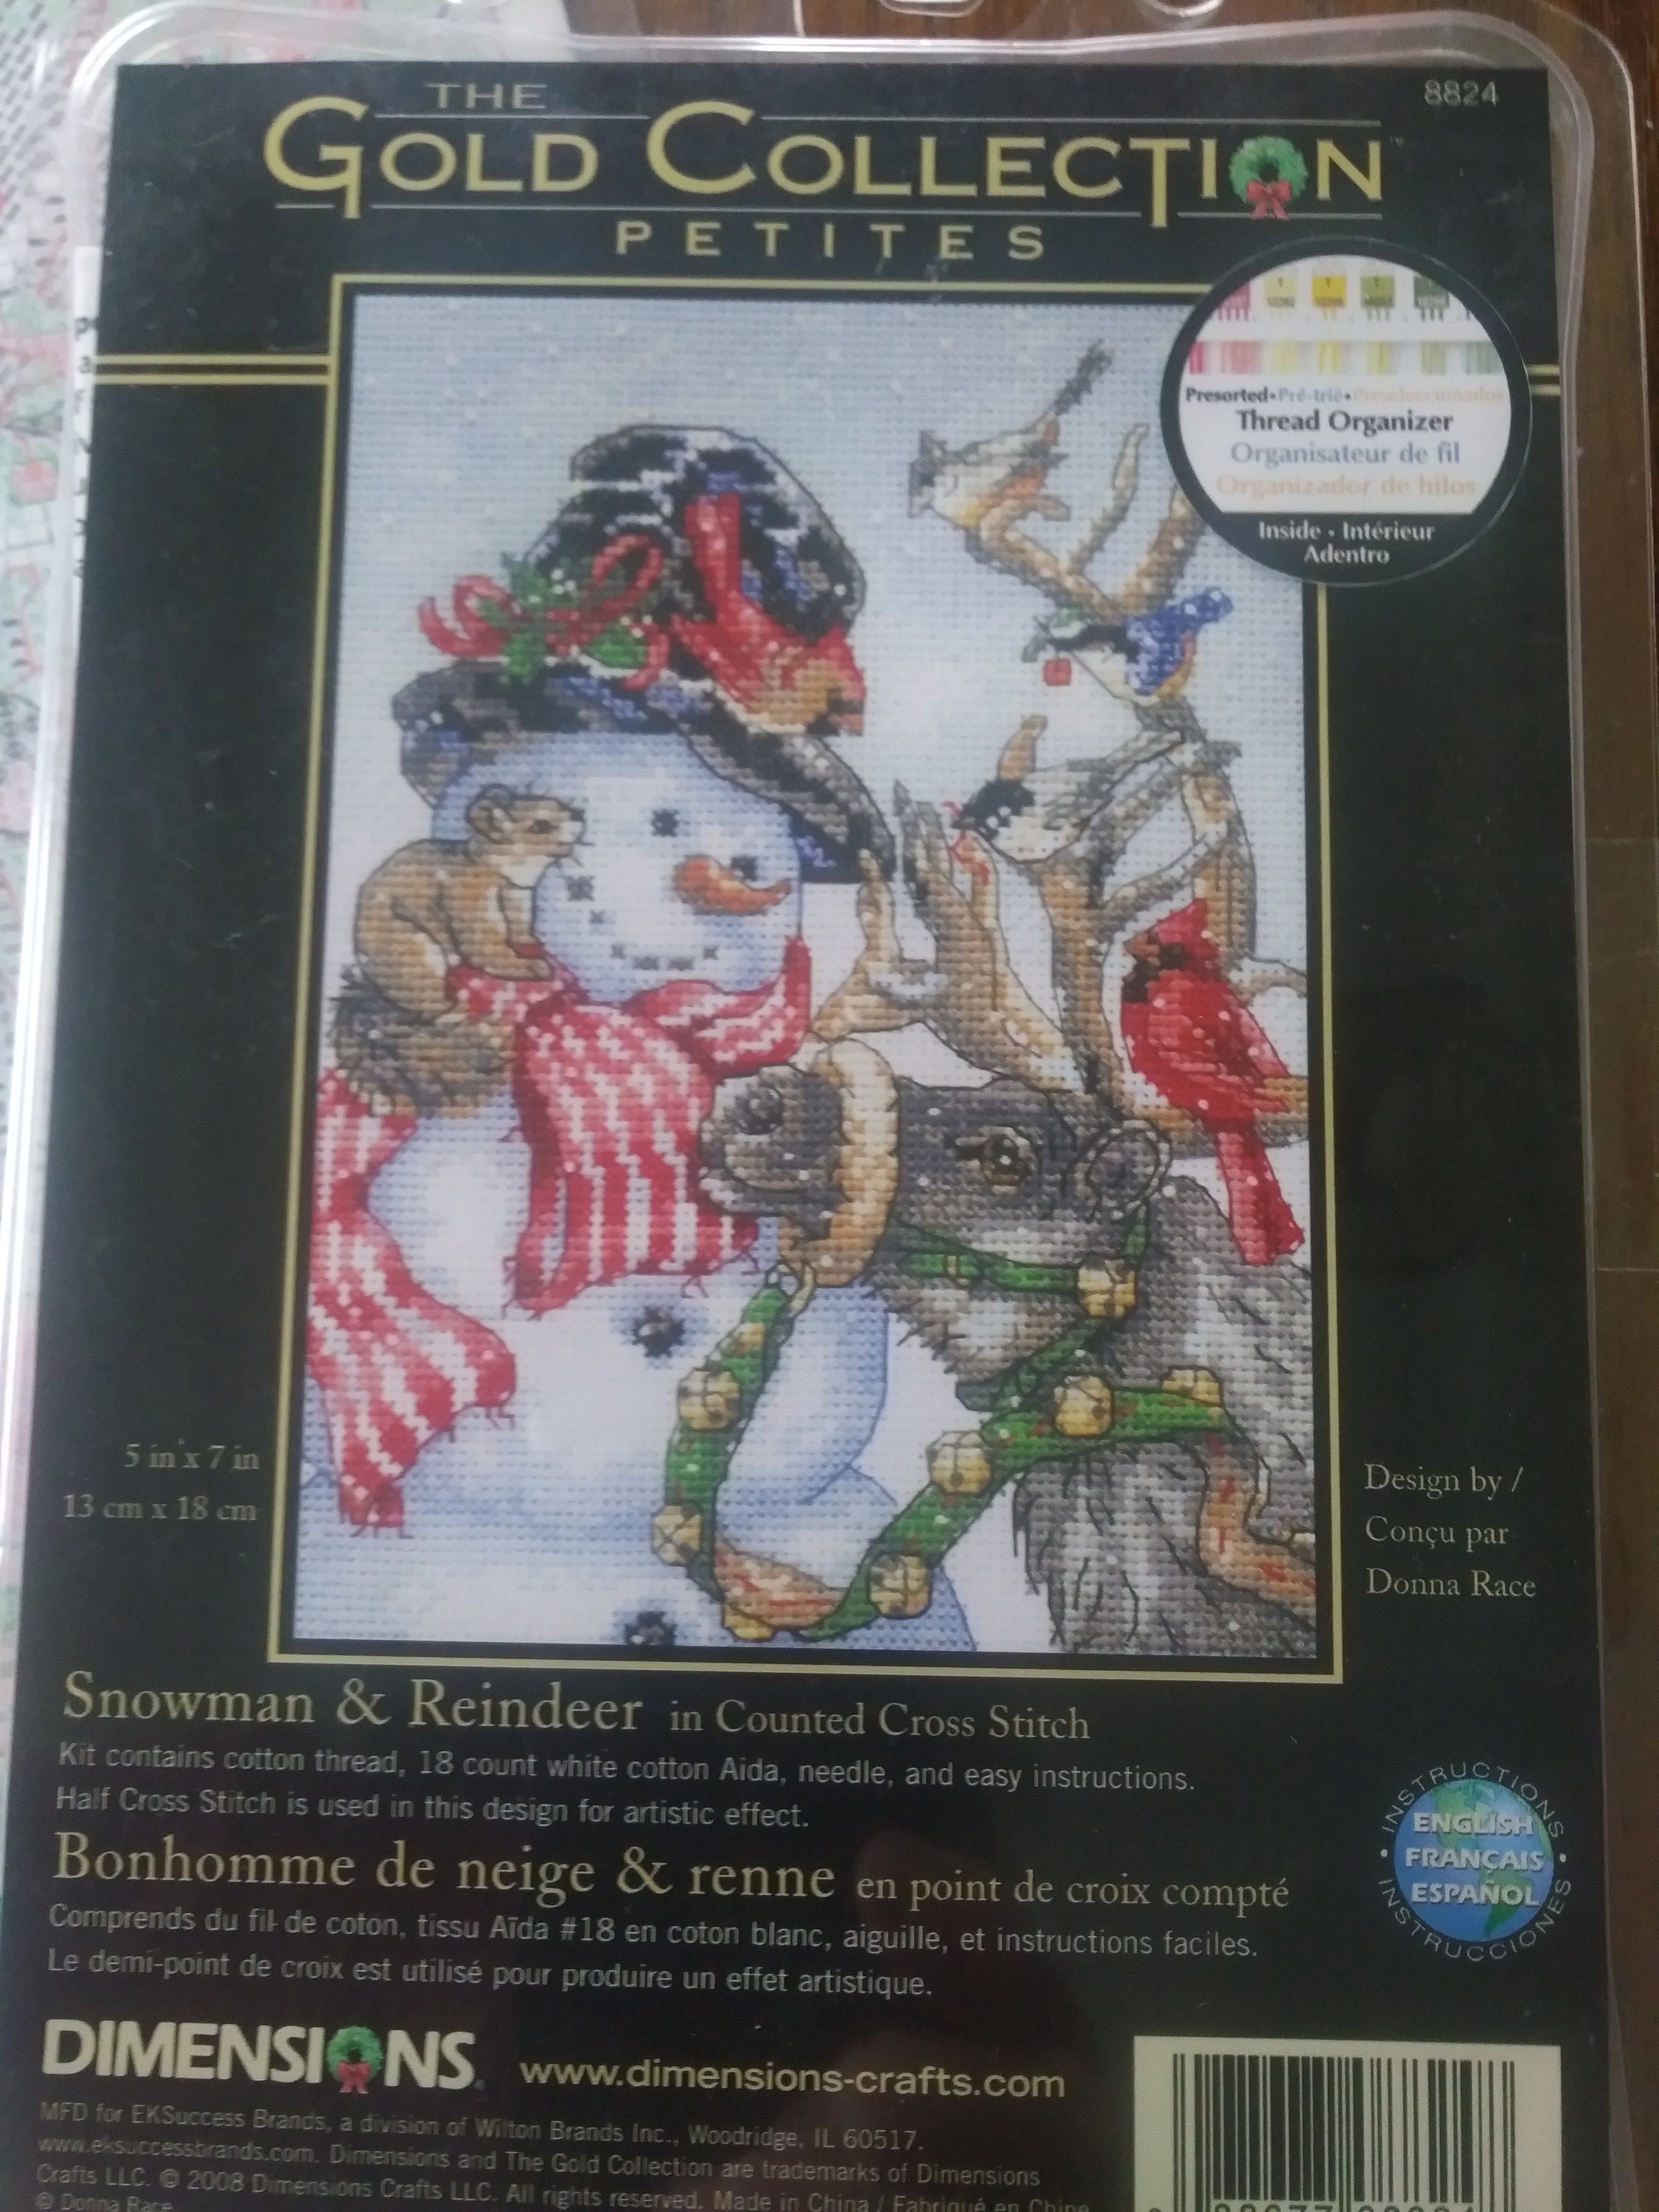 Dimensions Snowman & Reindeer Gold Petite Counted Cross Stitch Kit 